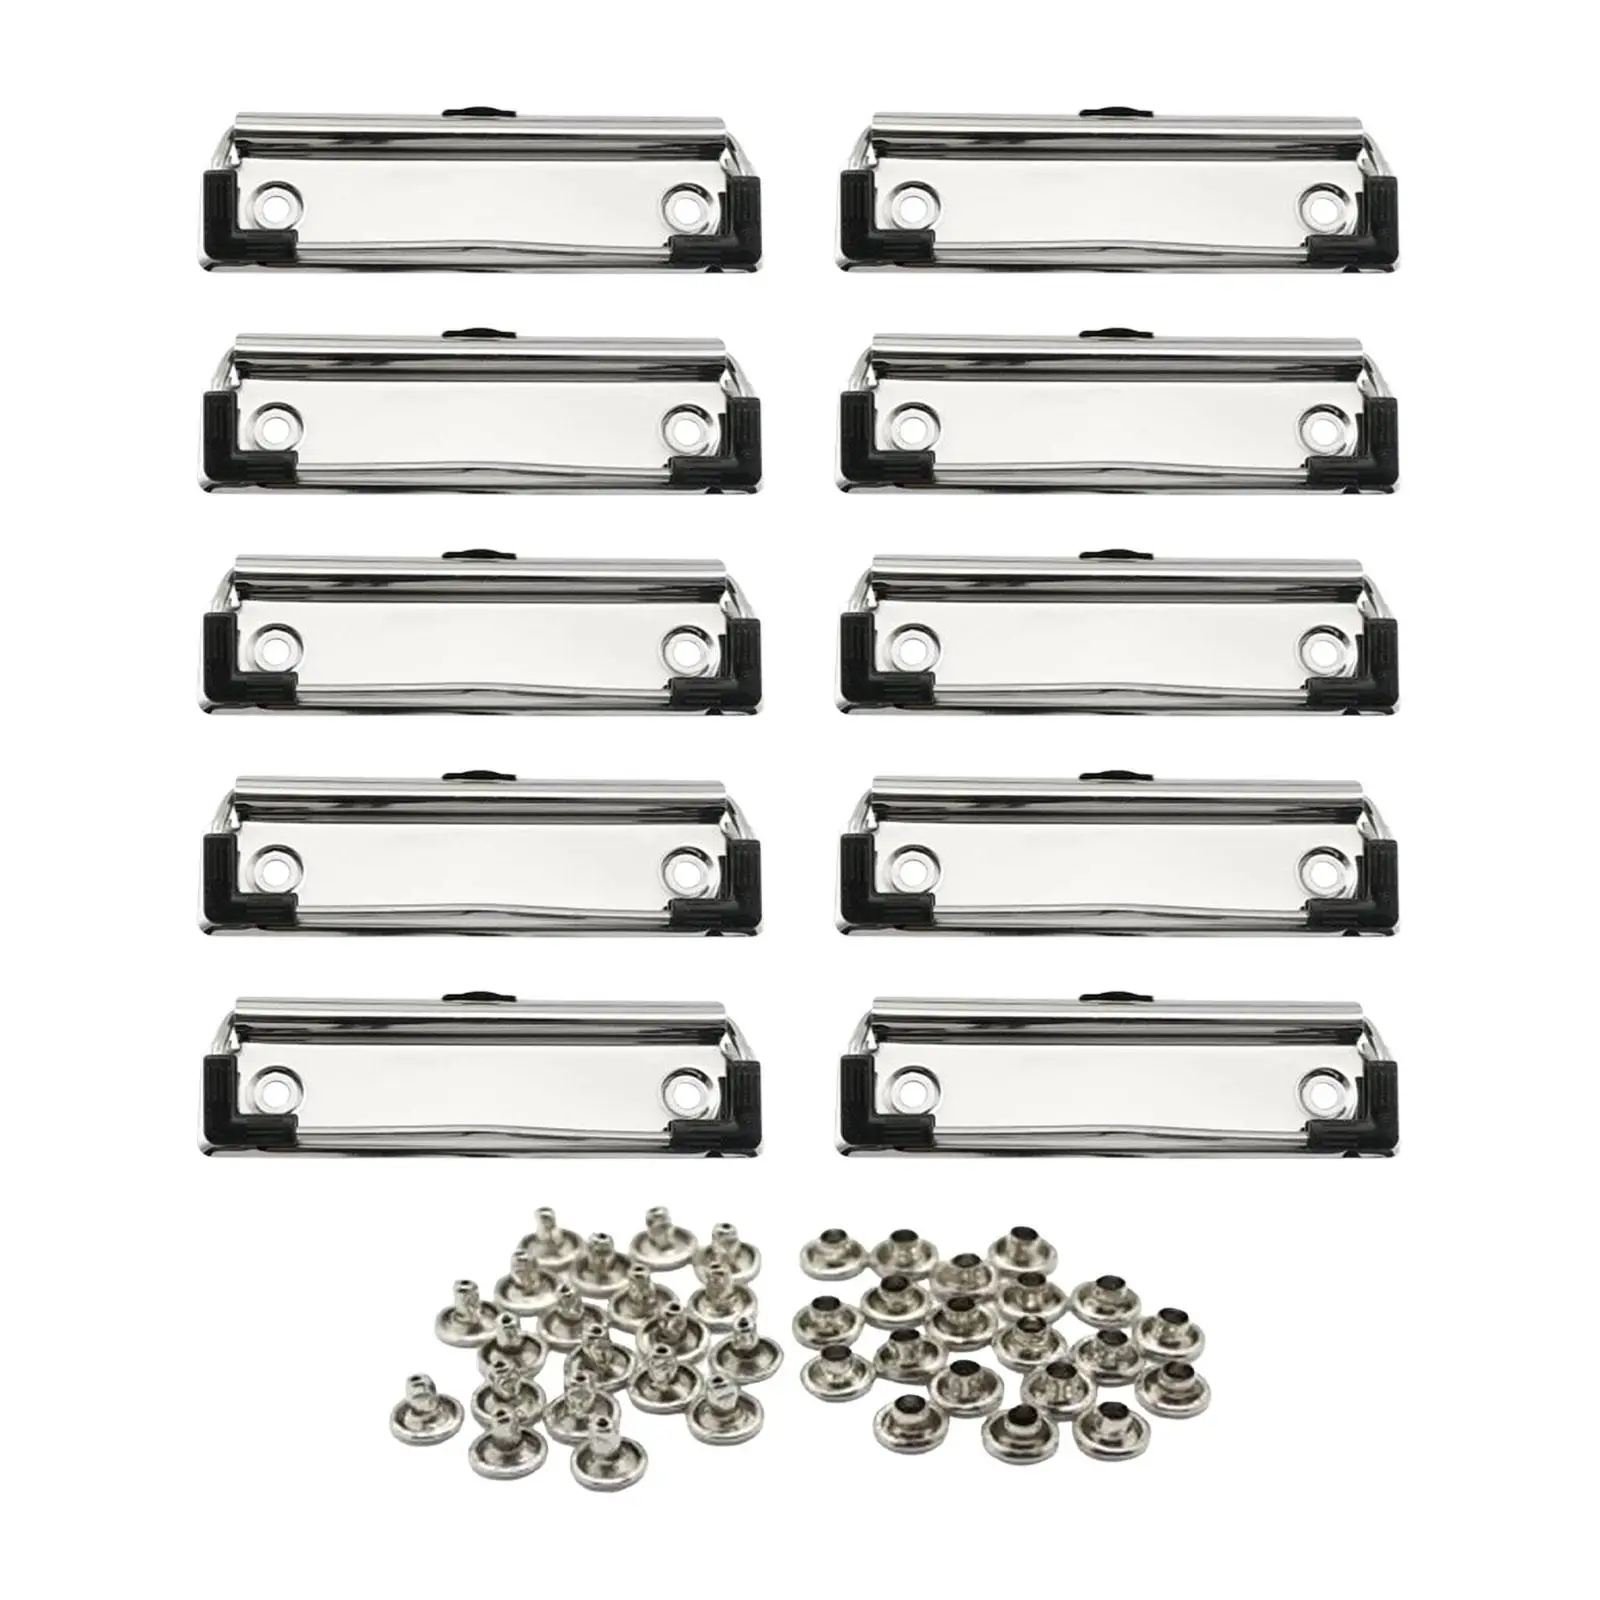 10 Pieces Clipboard Clamps Heavy Duty Spring Loaded Hardware Document Board Clips for Daily Use Class School Stationery Supplies